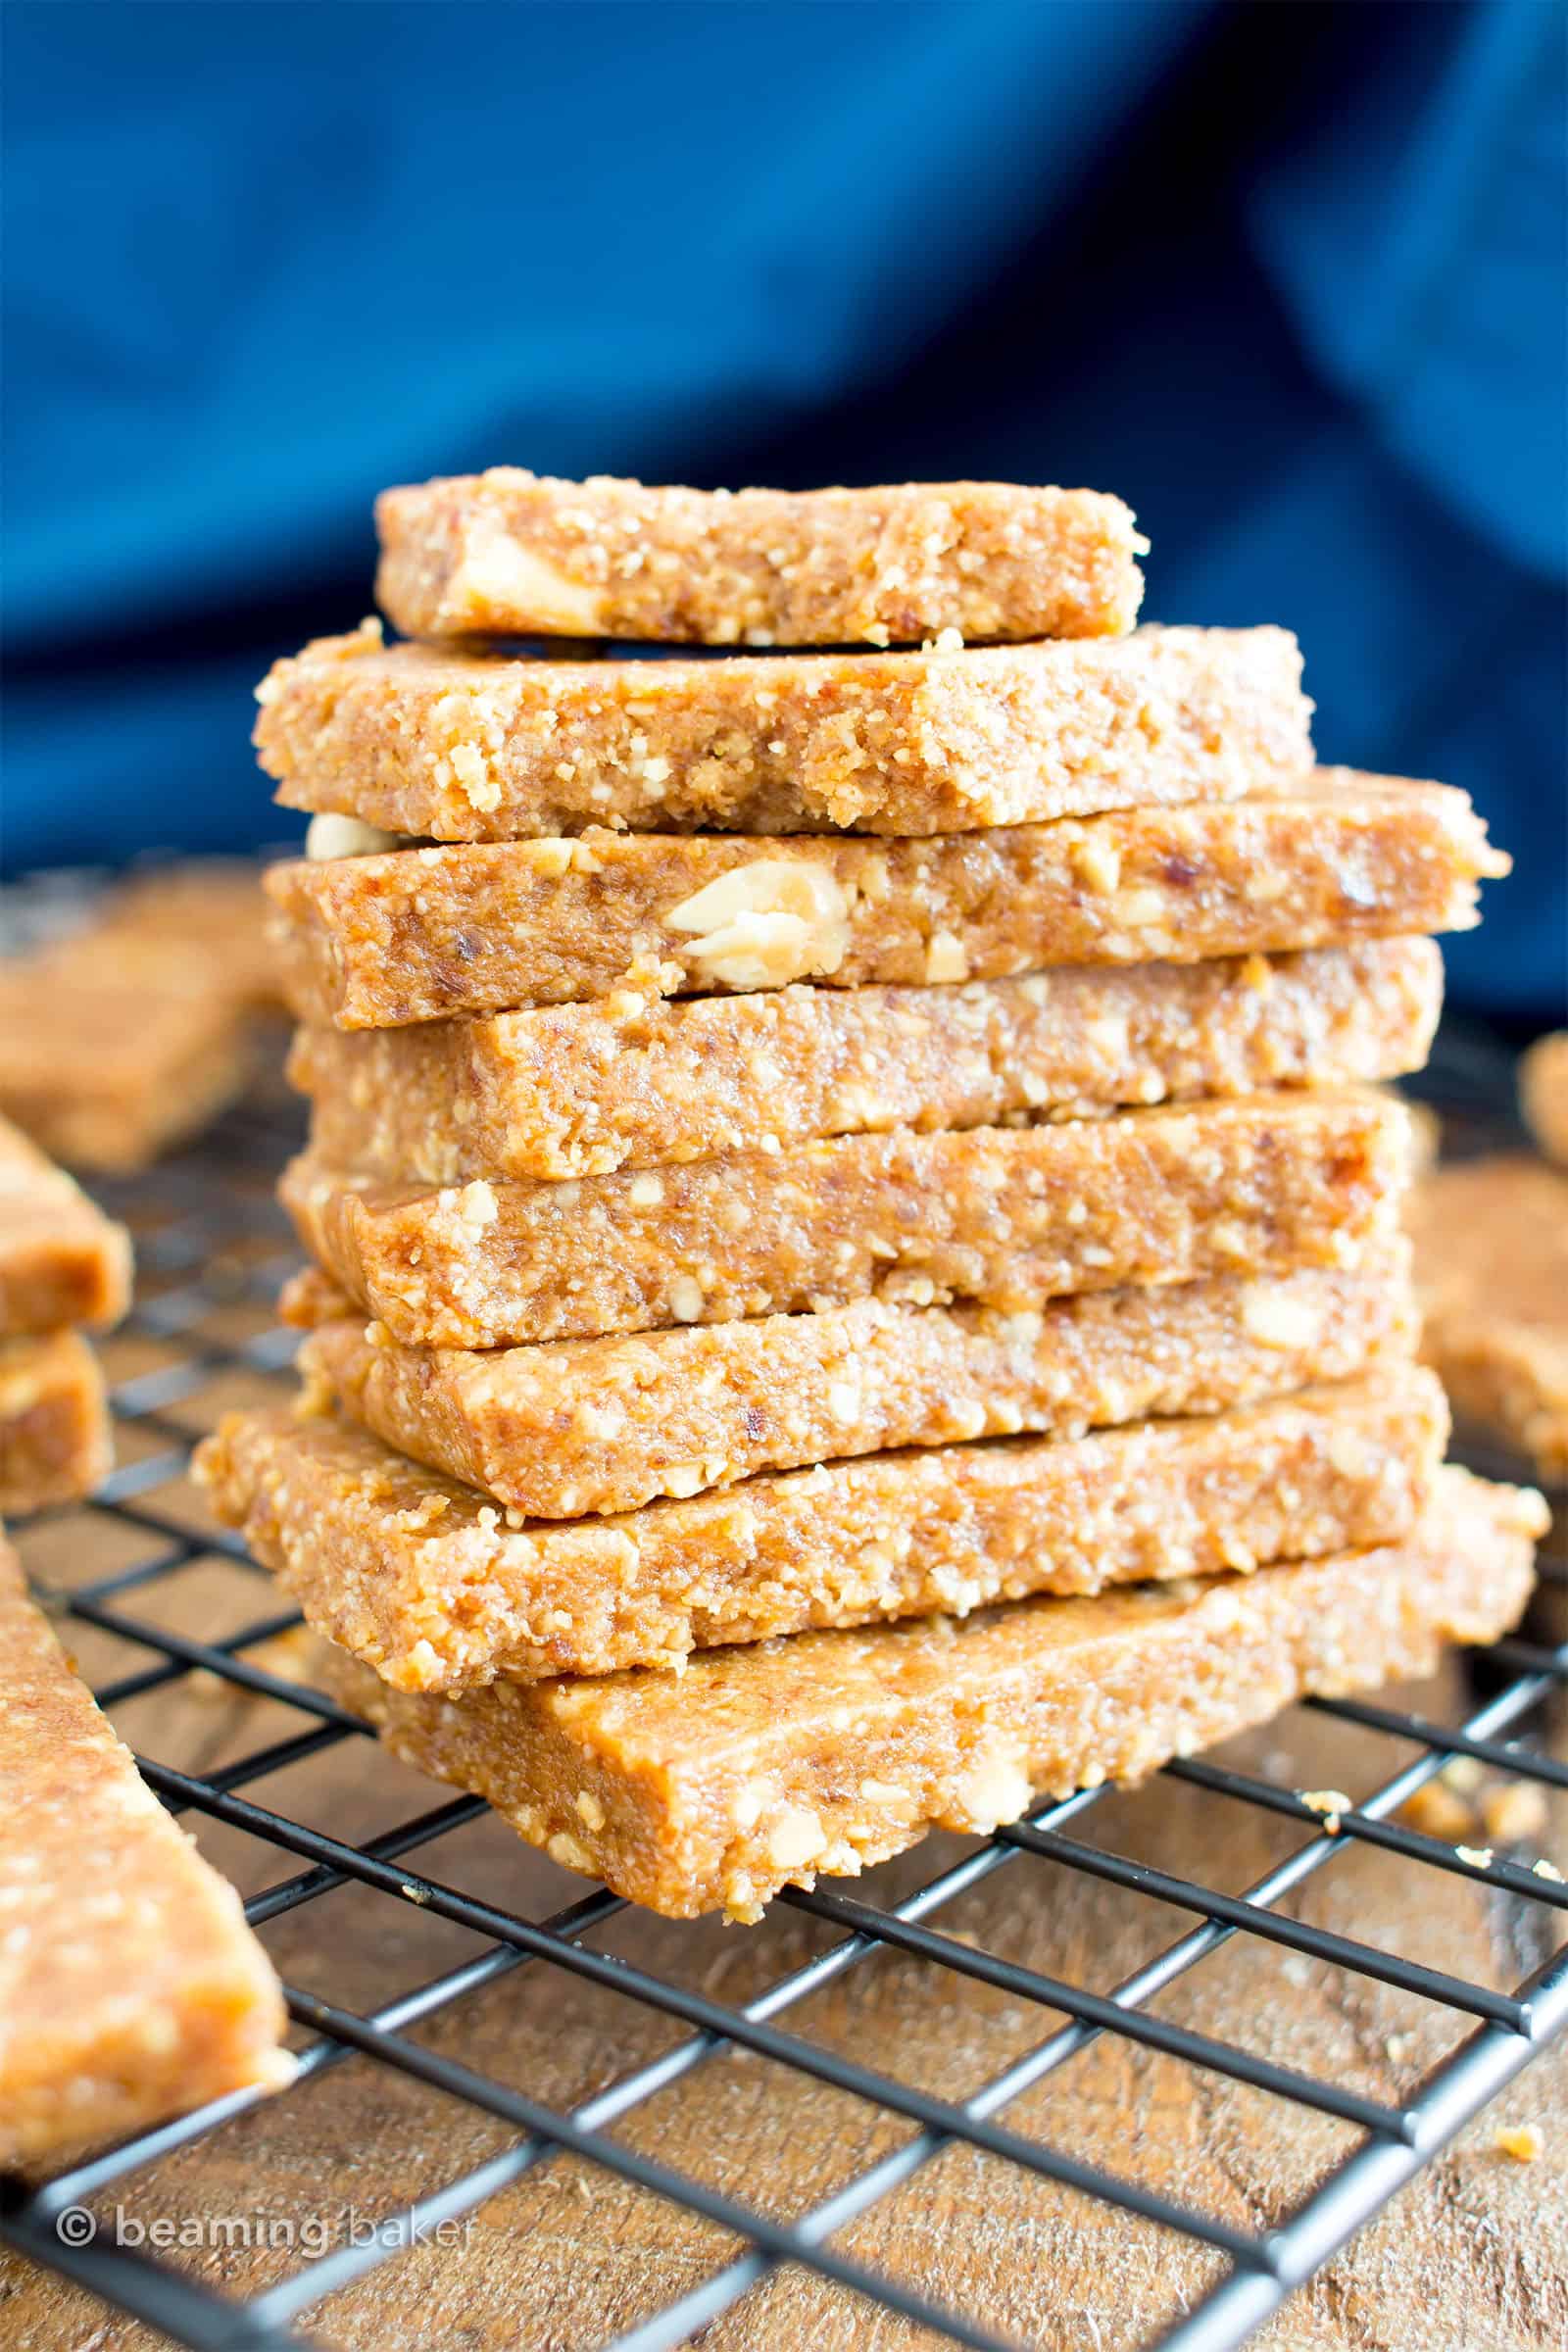 Peanut Butter Energy Bars: this 4 ingredient energy bars recipe is quick ‘n easy and yields the best energy bars that taste like peanut butter cookies! #EnergyBars #PeanutButter #NoBake | Recipe at BeamingBaker.com